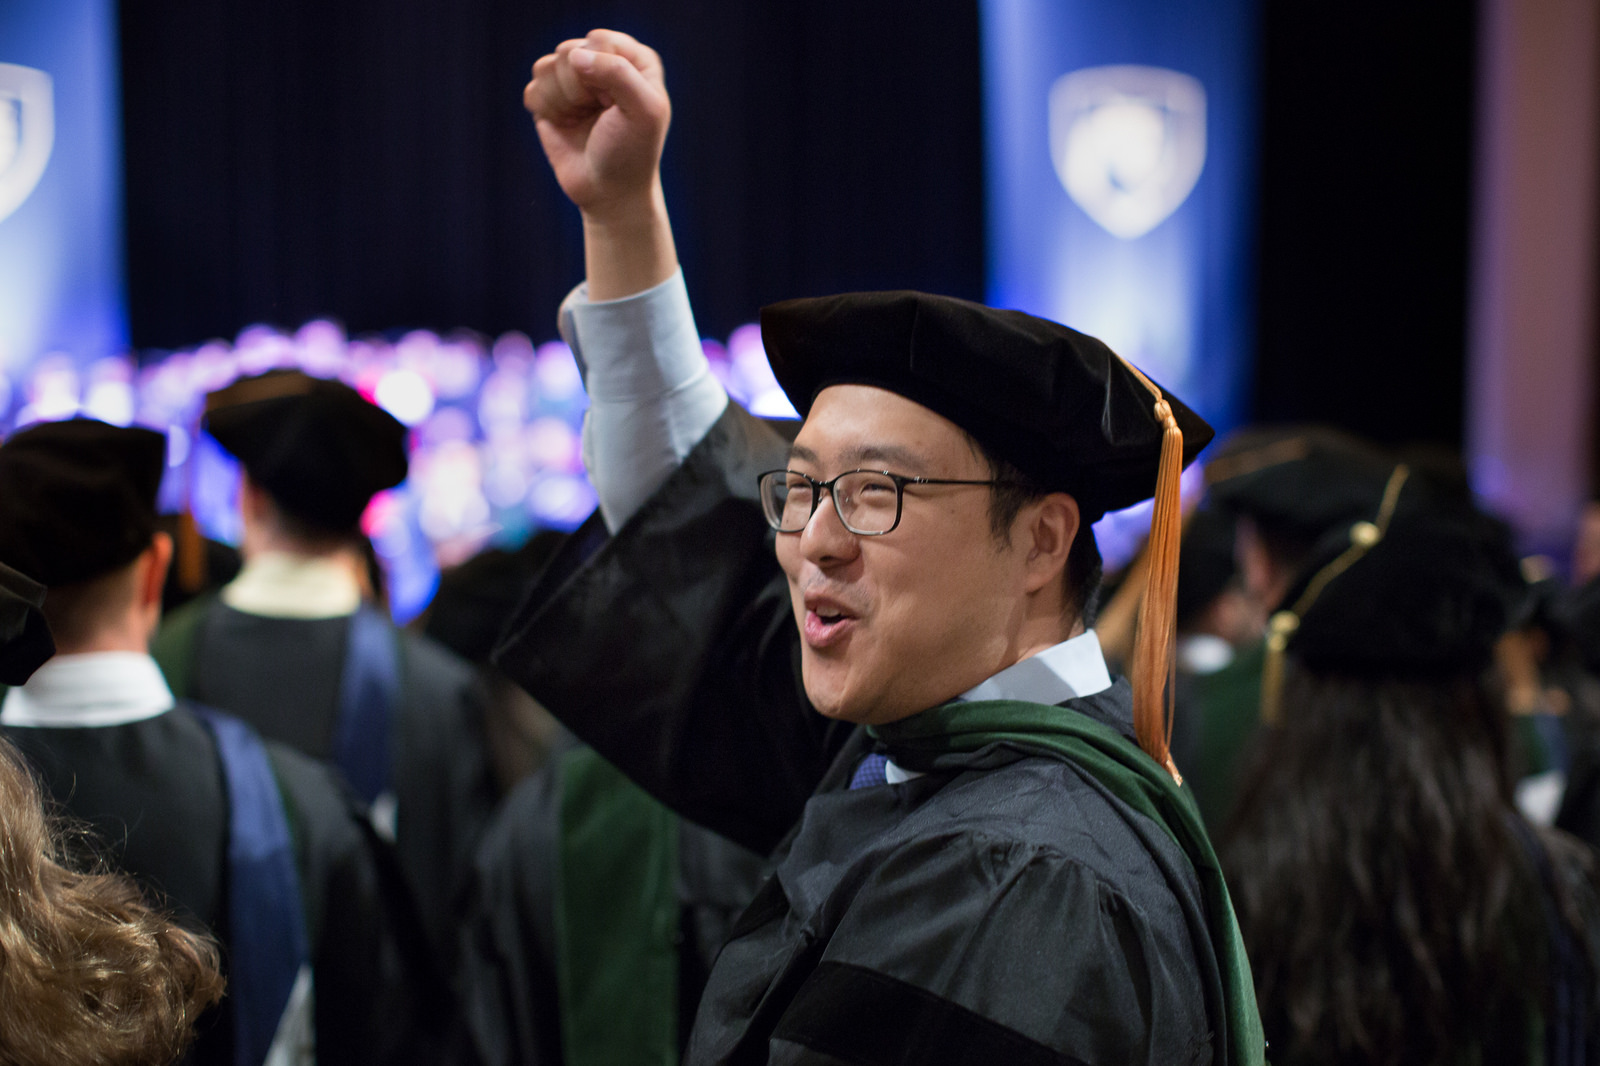 Penn State College of Medicine's Commencement was held at Founder's Hall at the Milton Hershey School on May 21, 2017. Pictured, Adrian Wang, MD, cheers during the ceremony. Wang is pictured wearing a cap and gown with his right hand extended in the air.